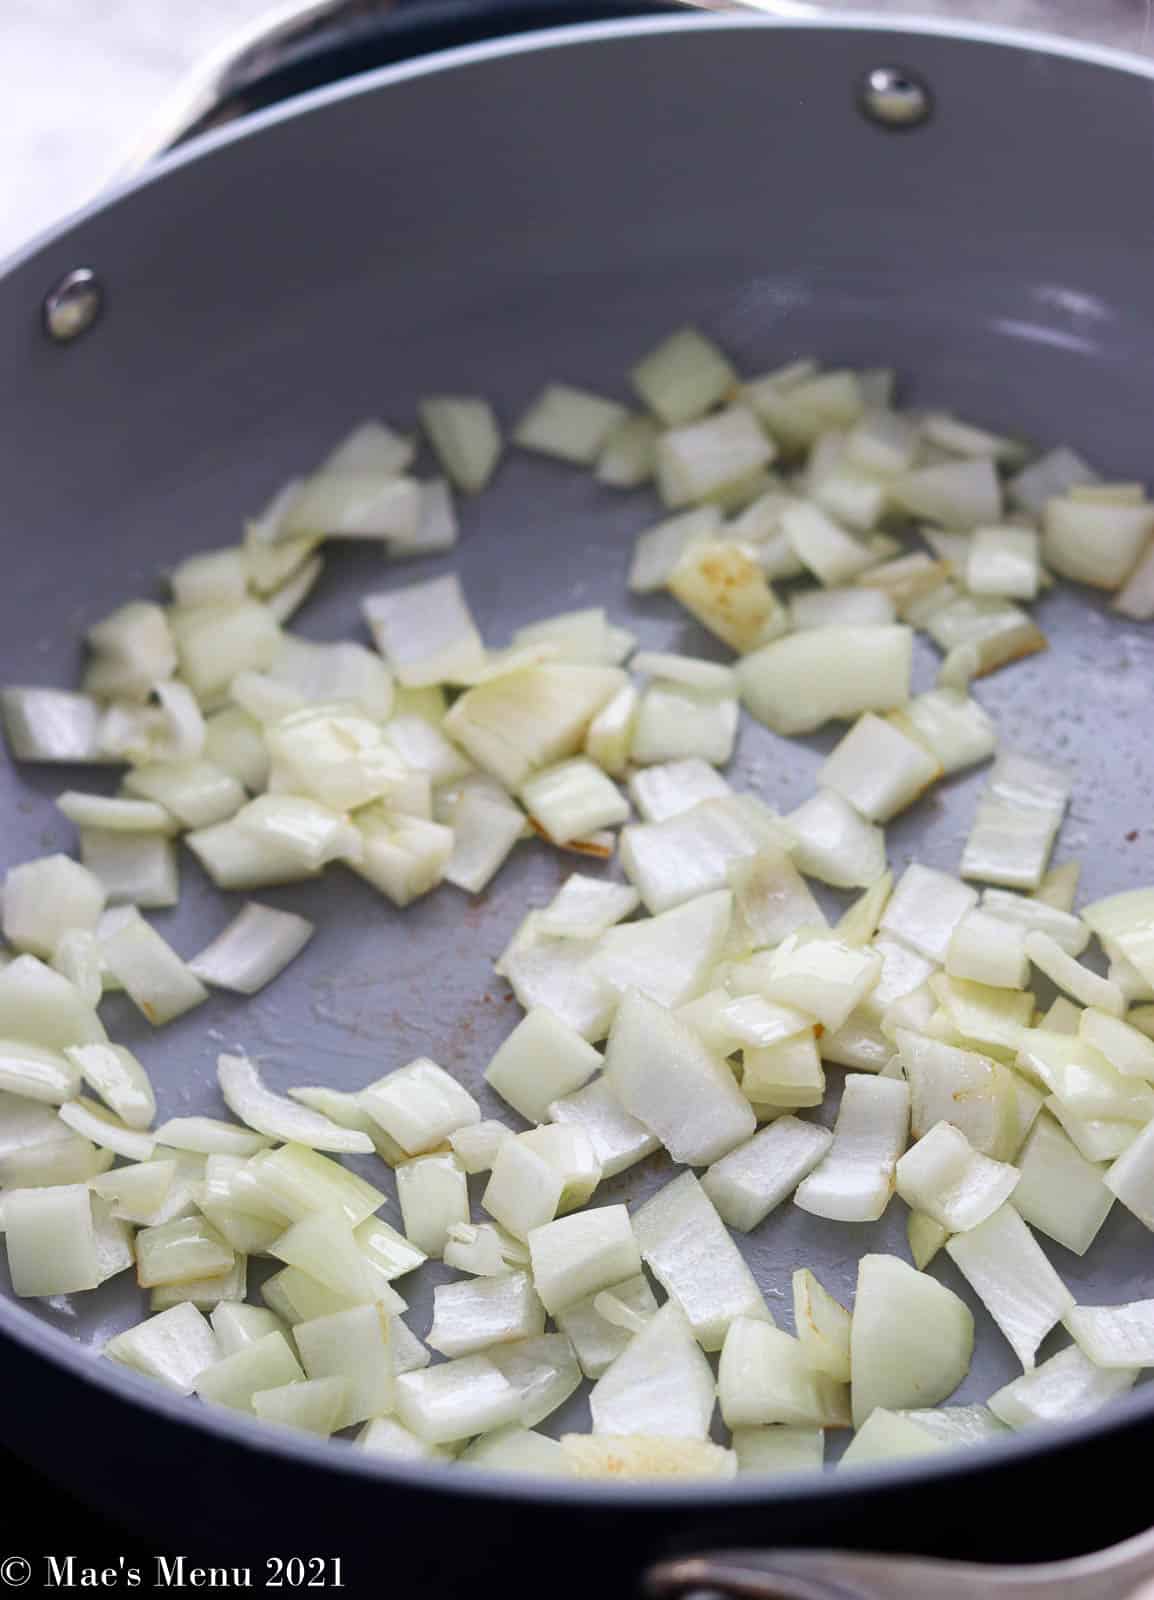 Onions sauteing in a pan